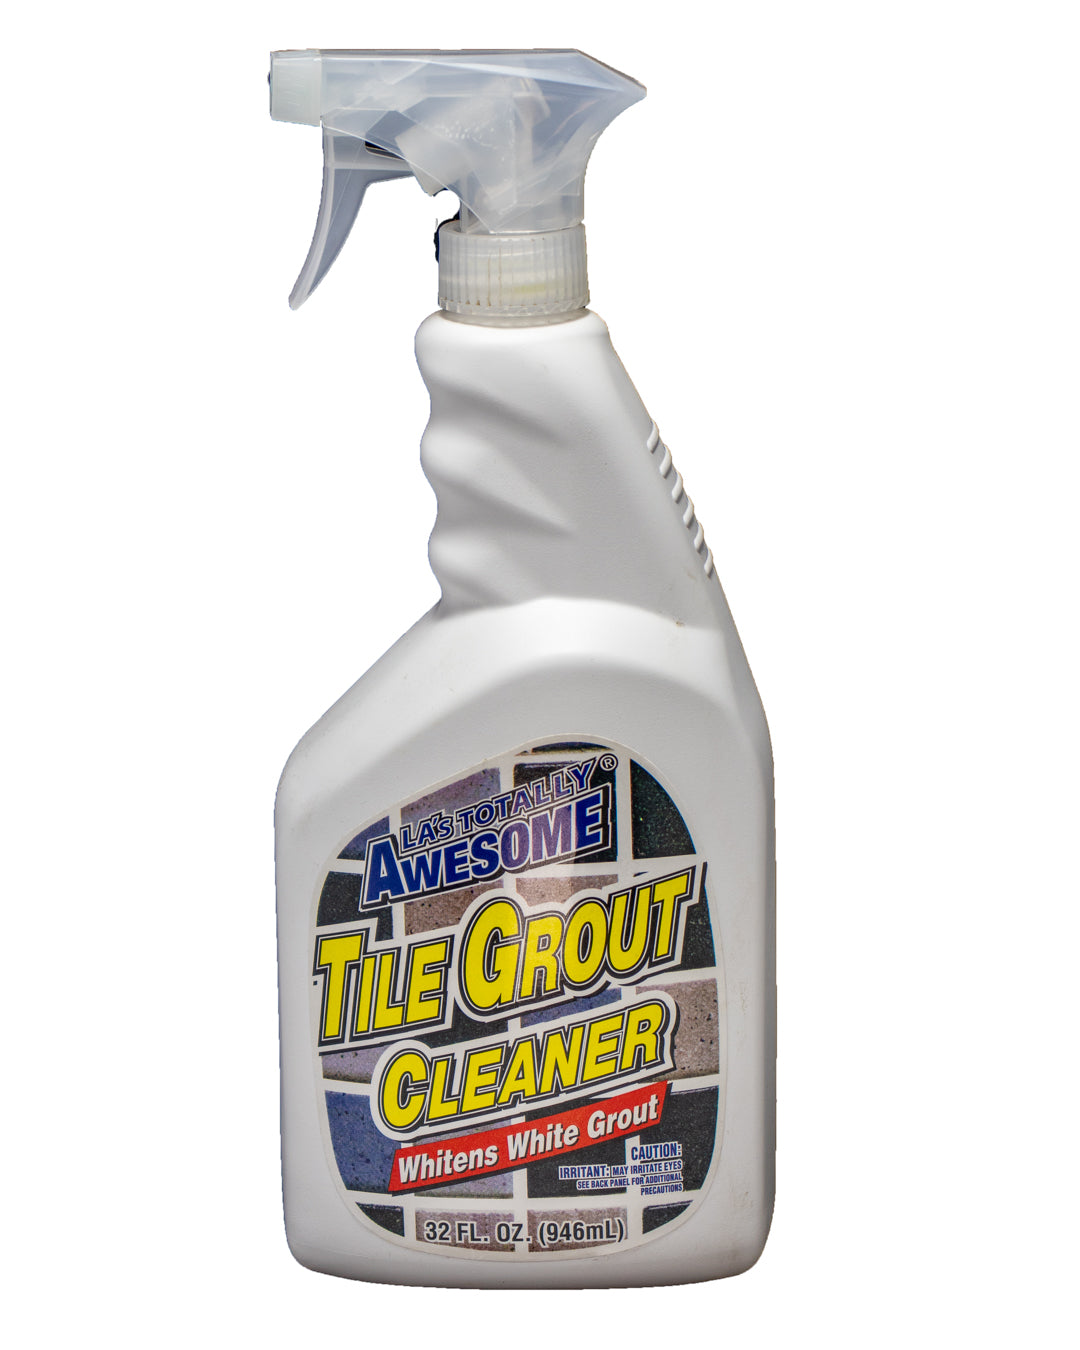 Wholesale LA's Totally Awesome 32oz Tile Grout Cleaner